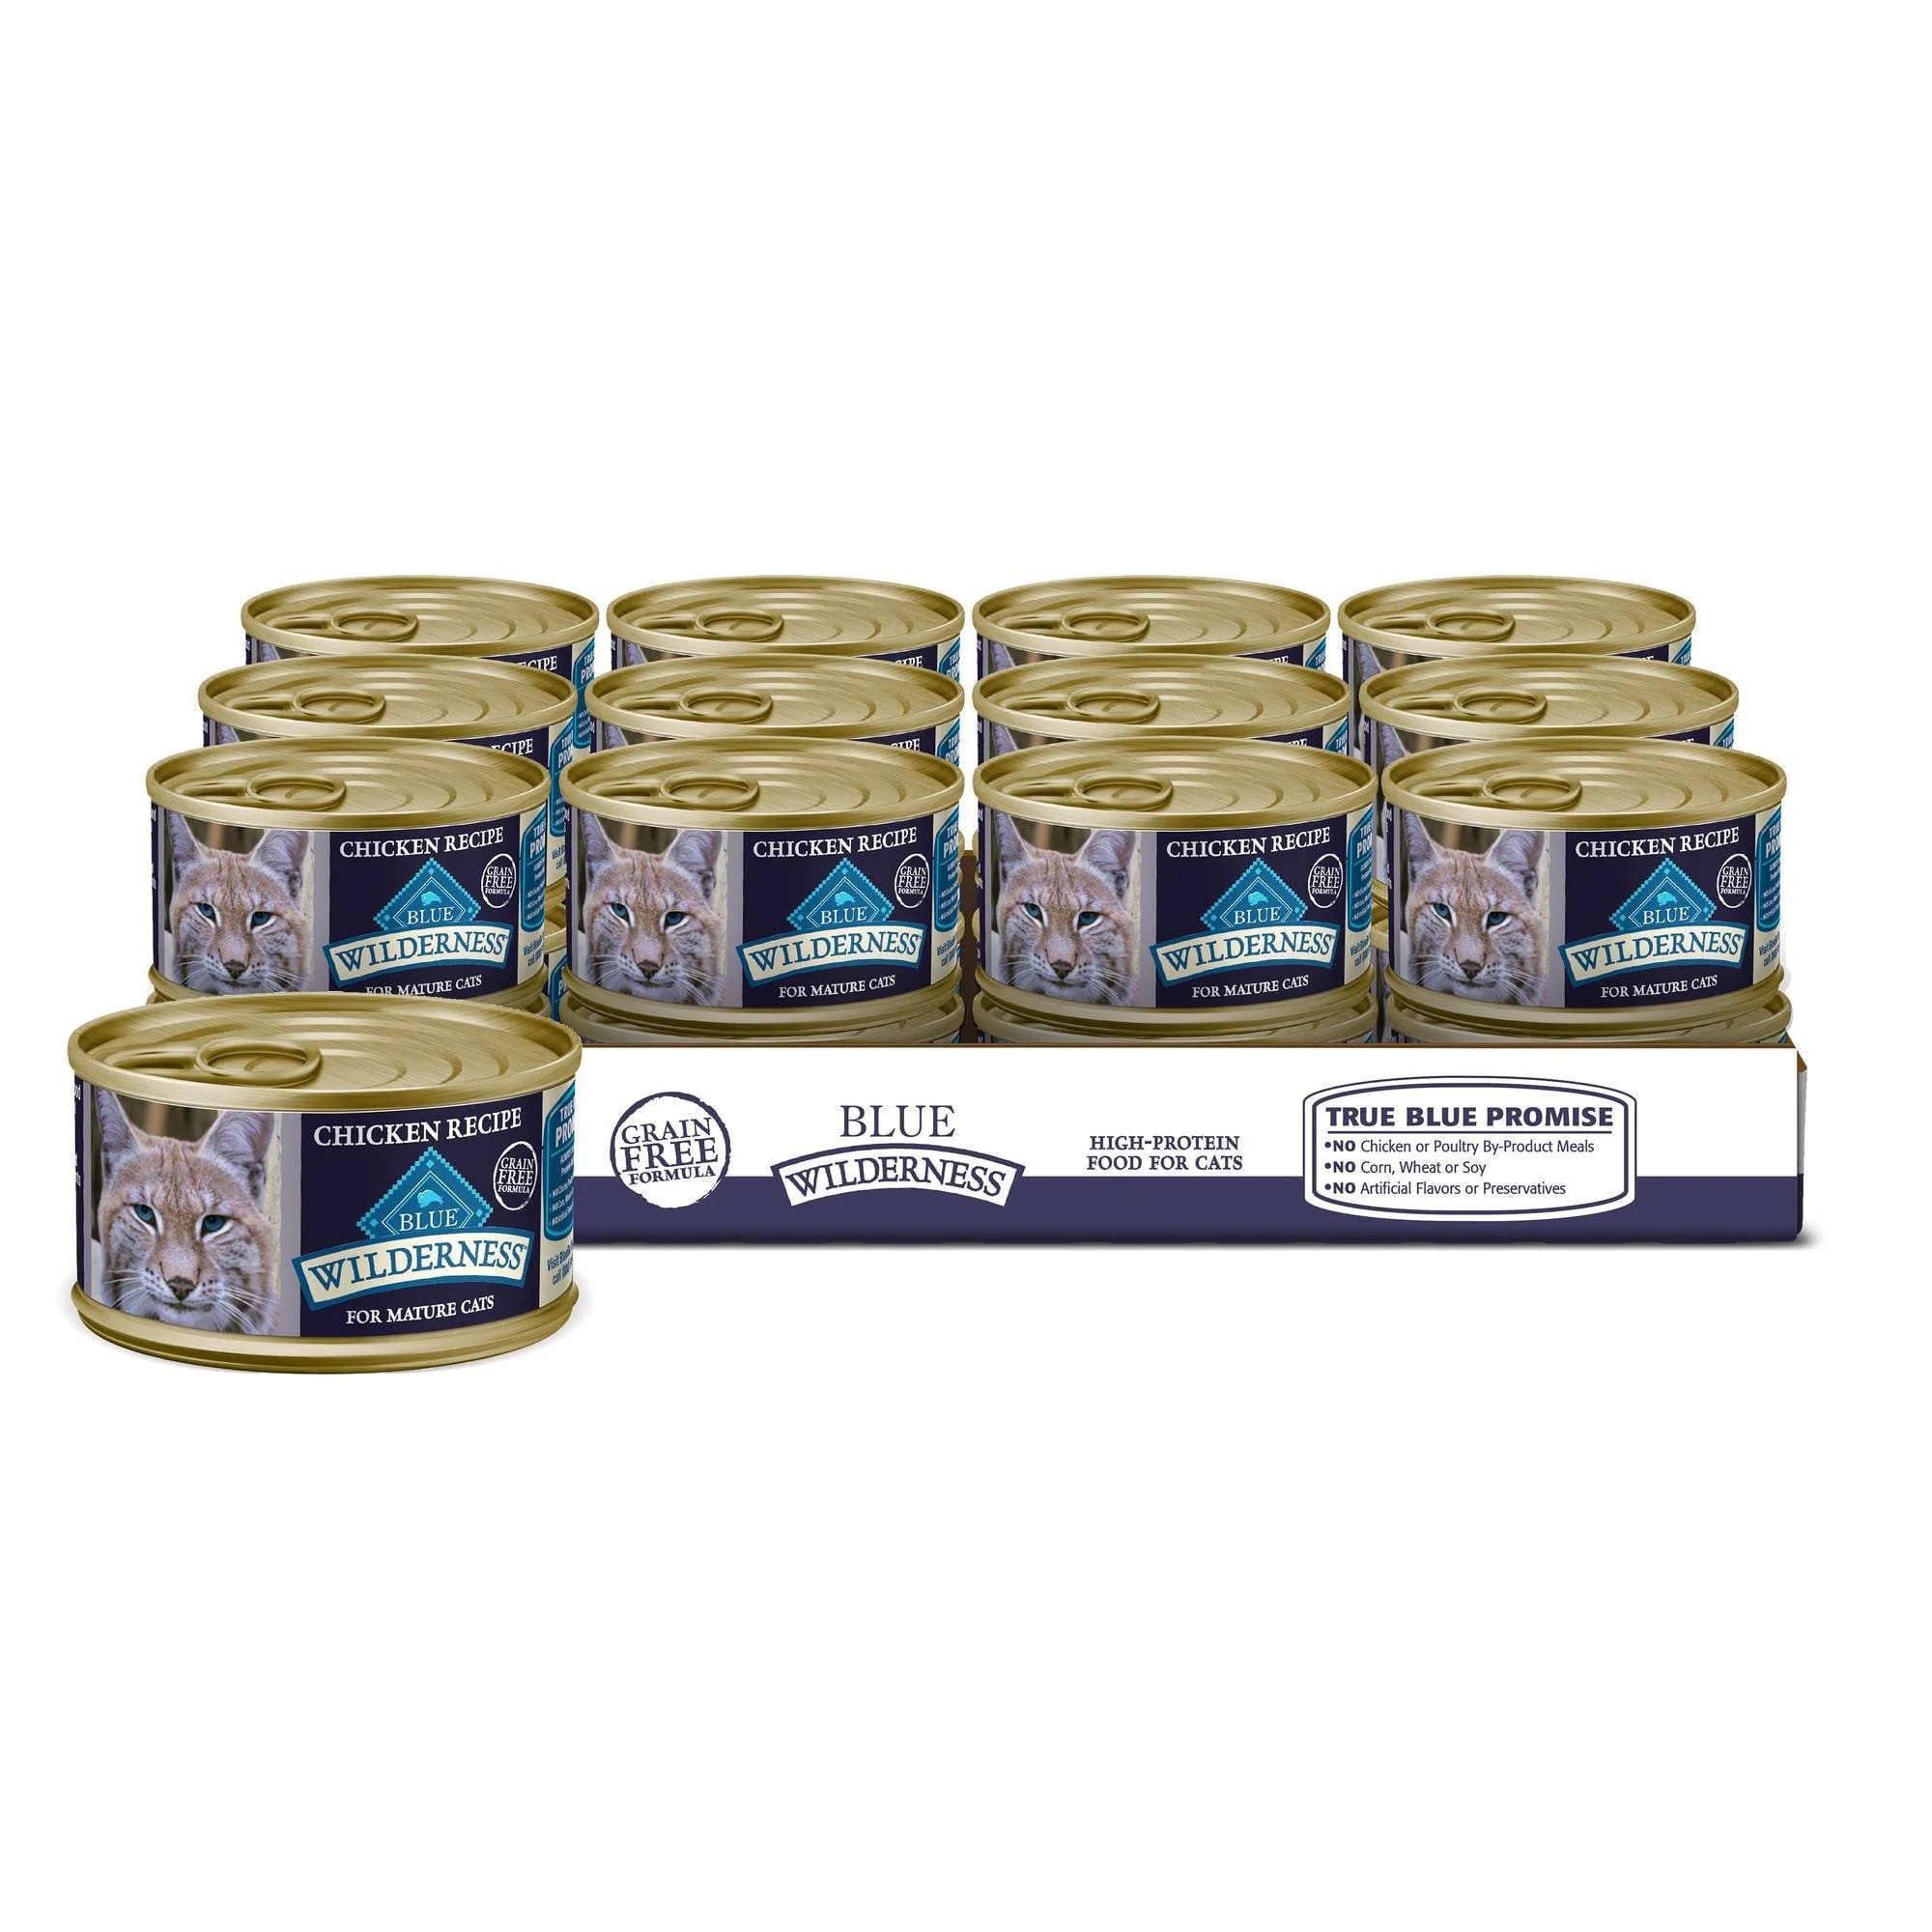 Grain-Free Mature Chicken Recipe Canned Cat Food by Blue Buffalo Wilderness | Image